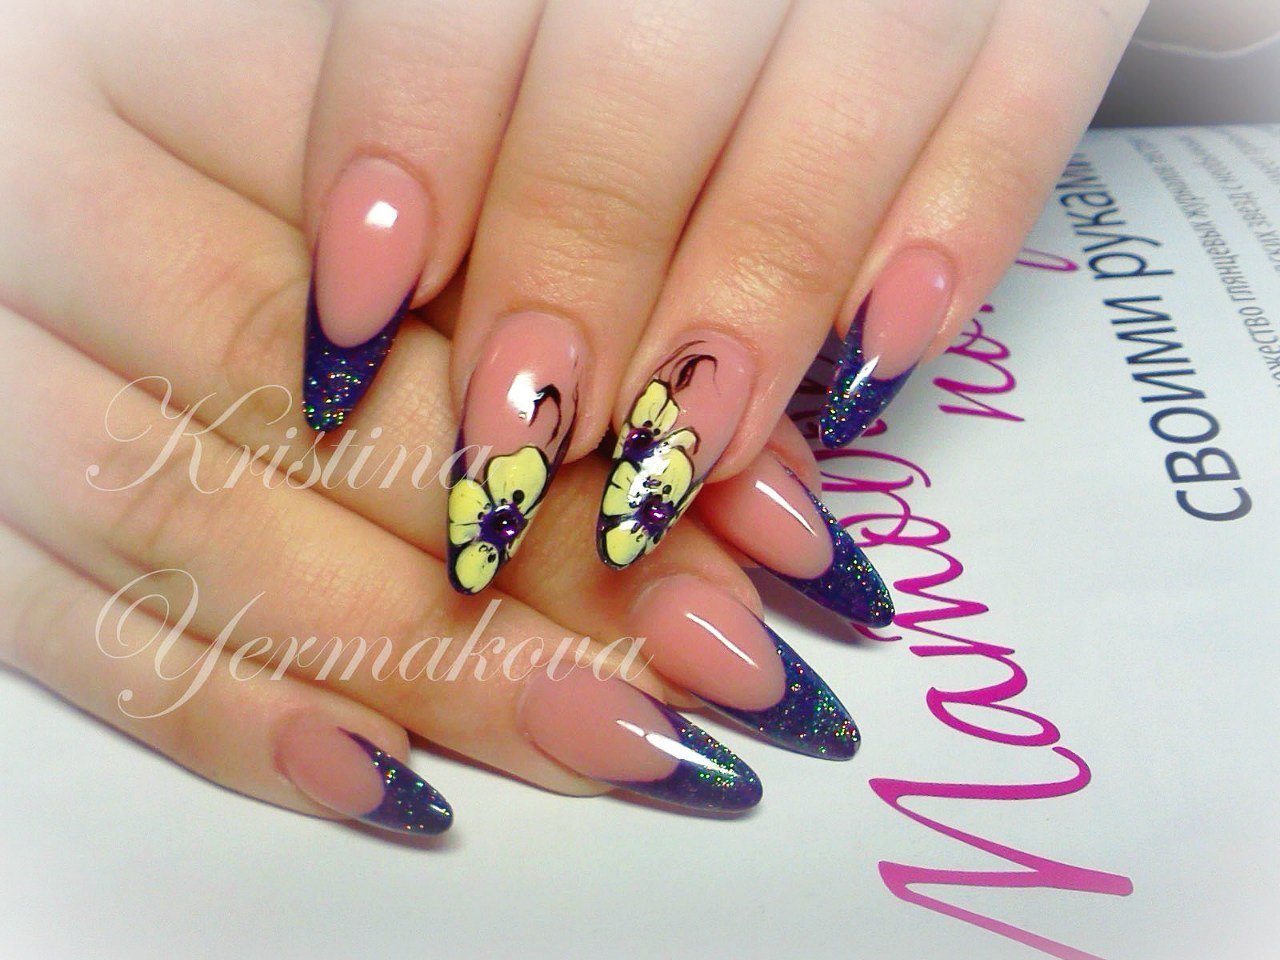 8. Nail Art for Special Occasions - wide 4